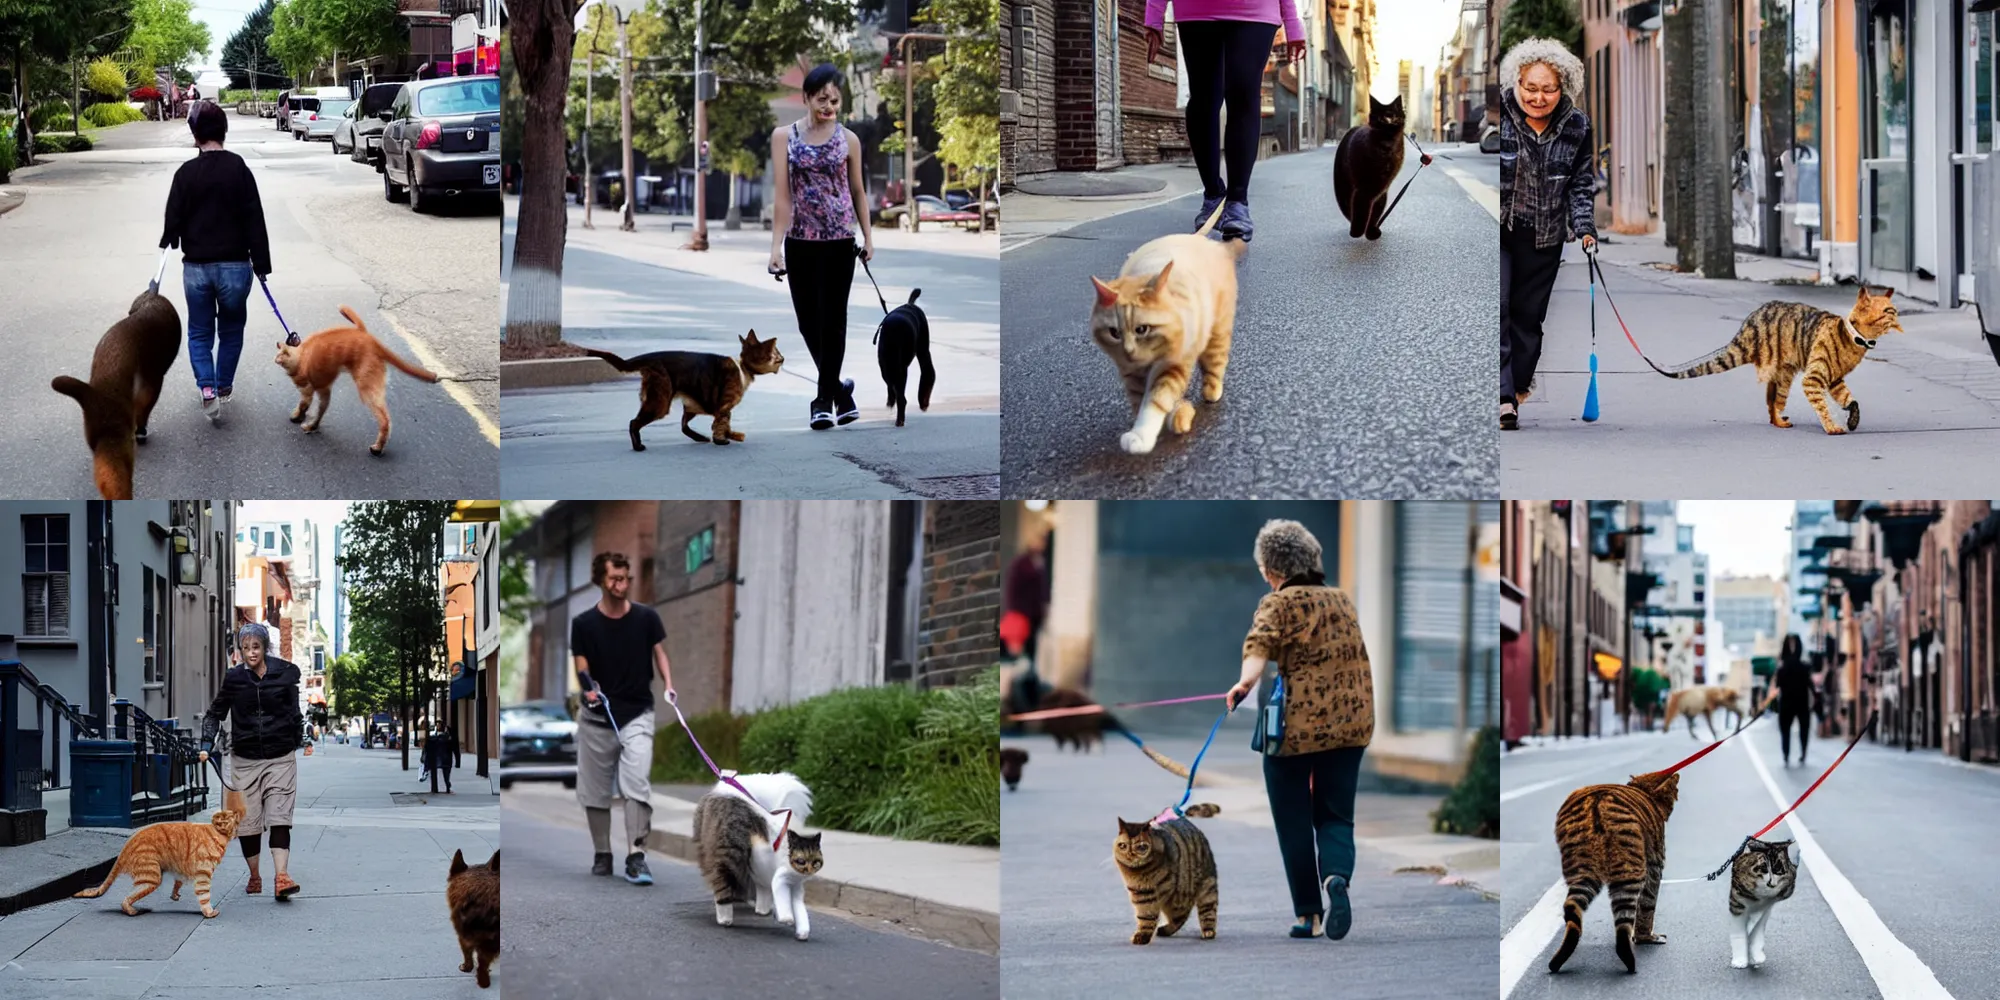 Prompt: A bipedal cat is walking a dog on the street